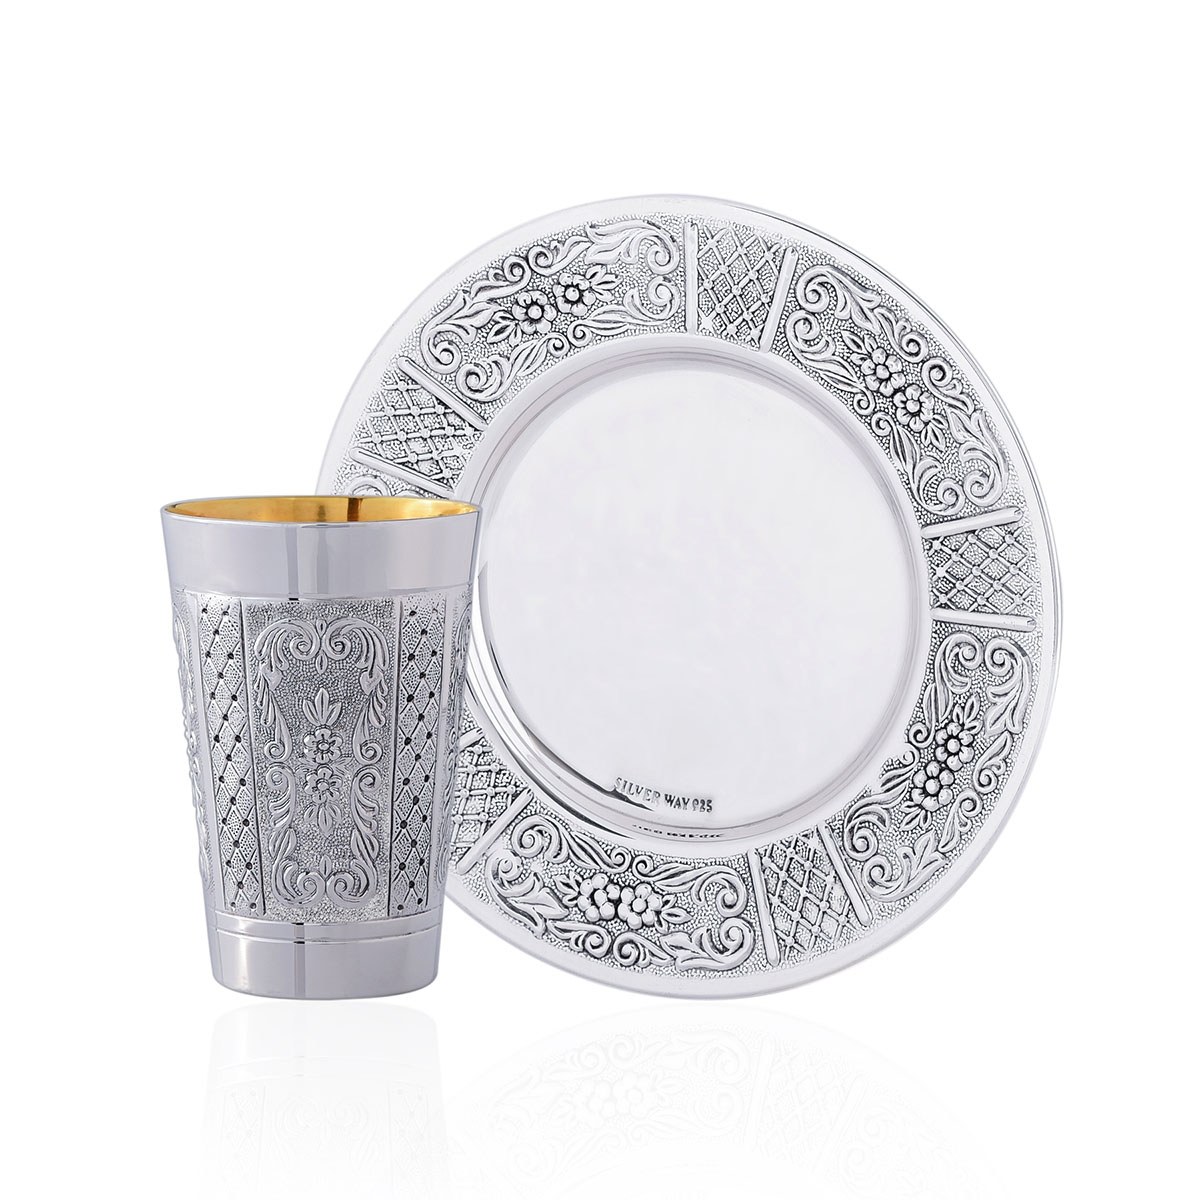 Refined 925 Sterling Kiddush Cup Set With Ornate Floral Designs - 1